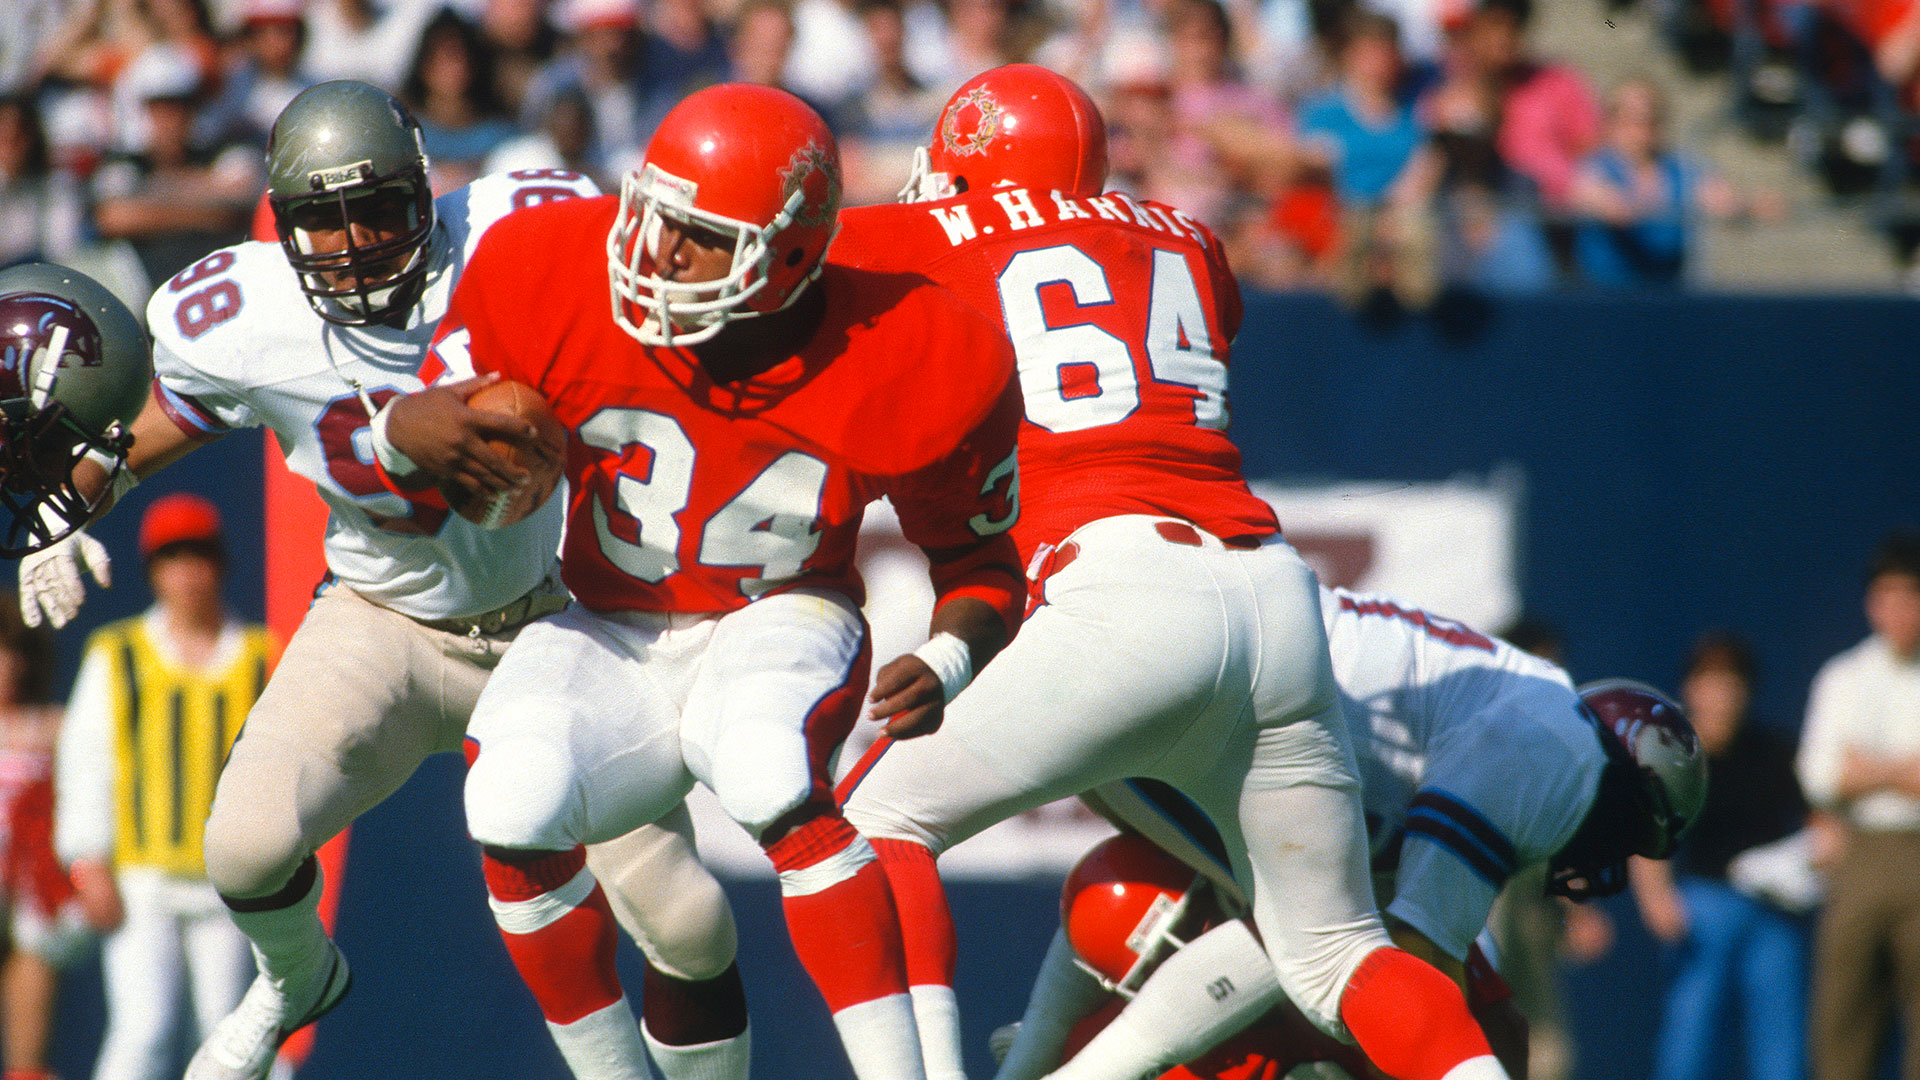 Running back Herschel Walker #34 of the New Jersey Generals carries the ball against the Birmingham Stallions circa 1983 during an USFL football game at The Meadowlands in East Rutherford, New Jersey